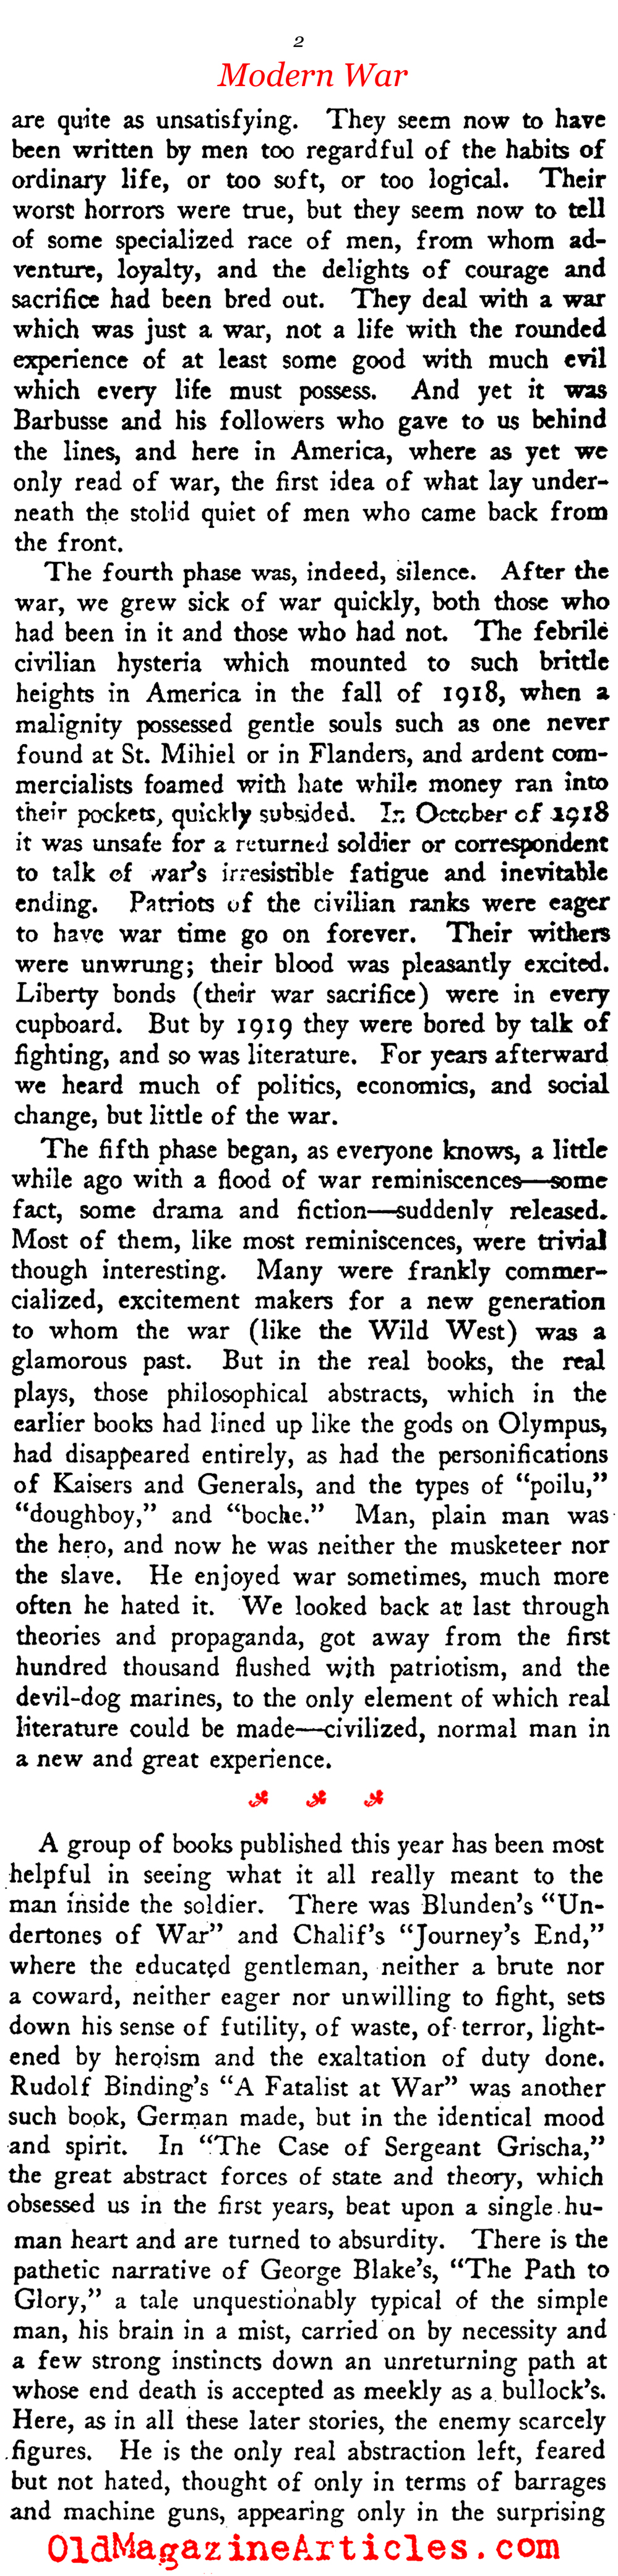 All Quiet on the Western Front (Saturday Review of Literature, 1929)